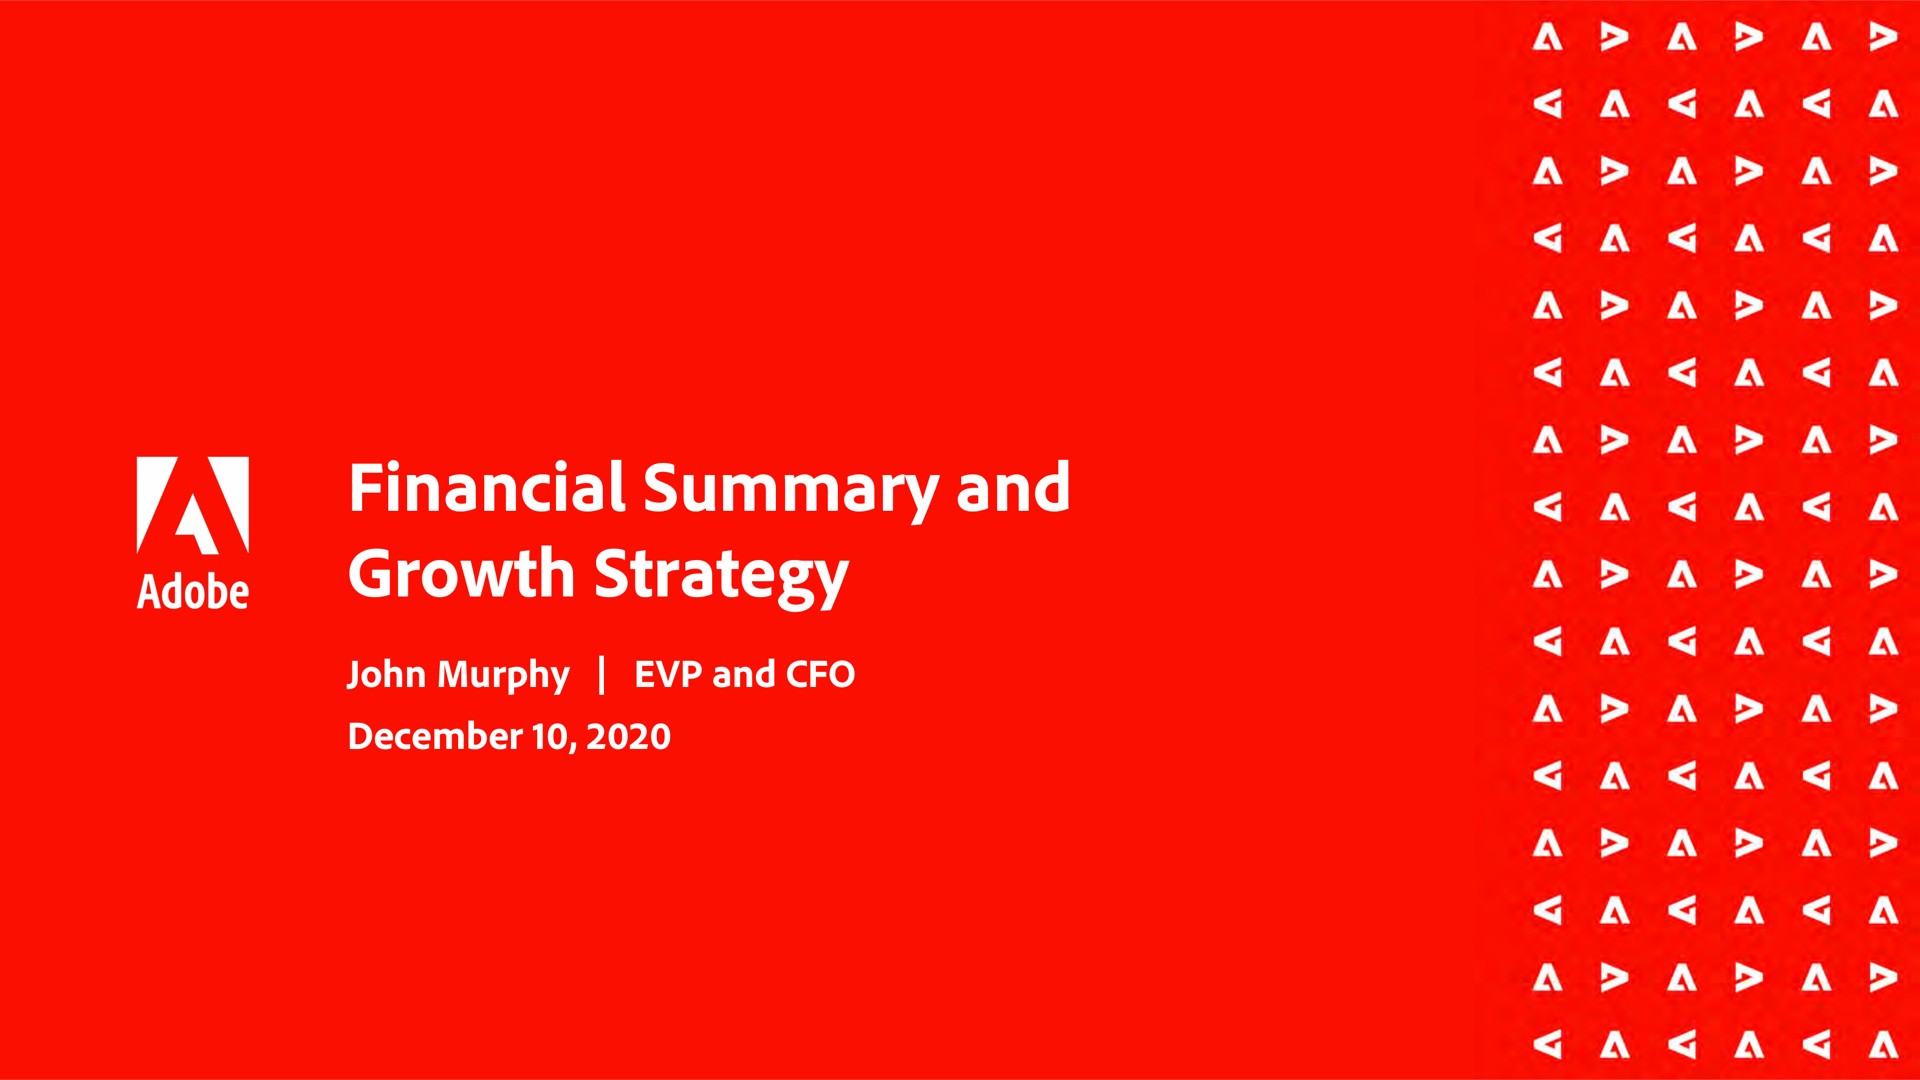 financial summary and growth strategy a a a a a a a a a a a a a a a a a a a a a | Adobe